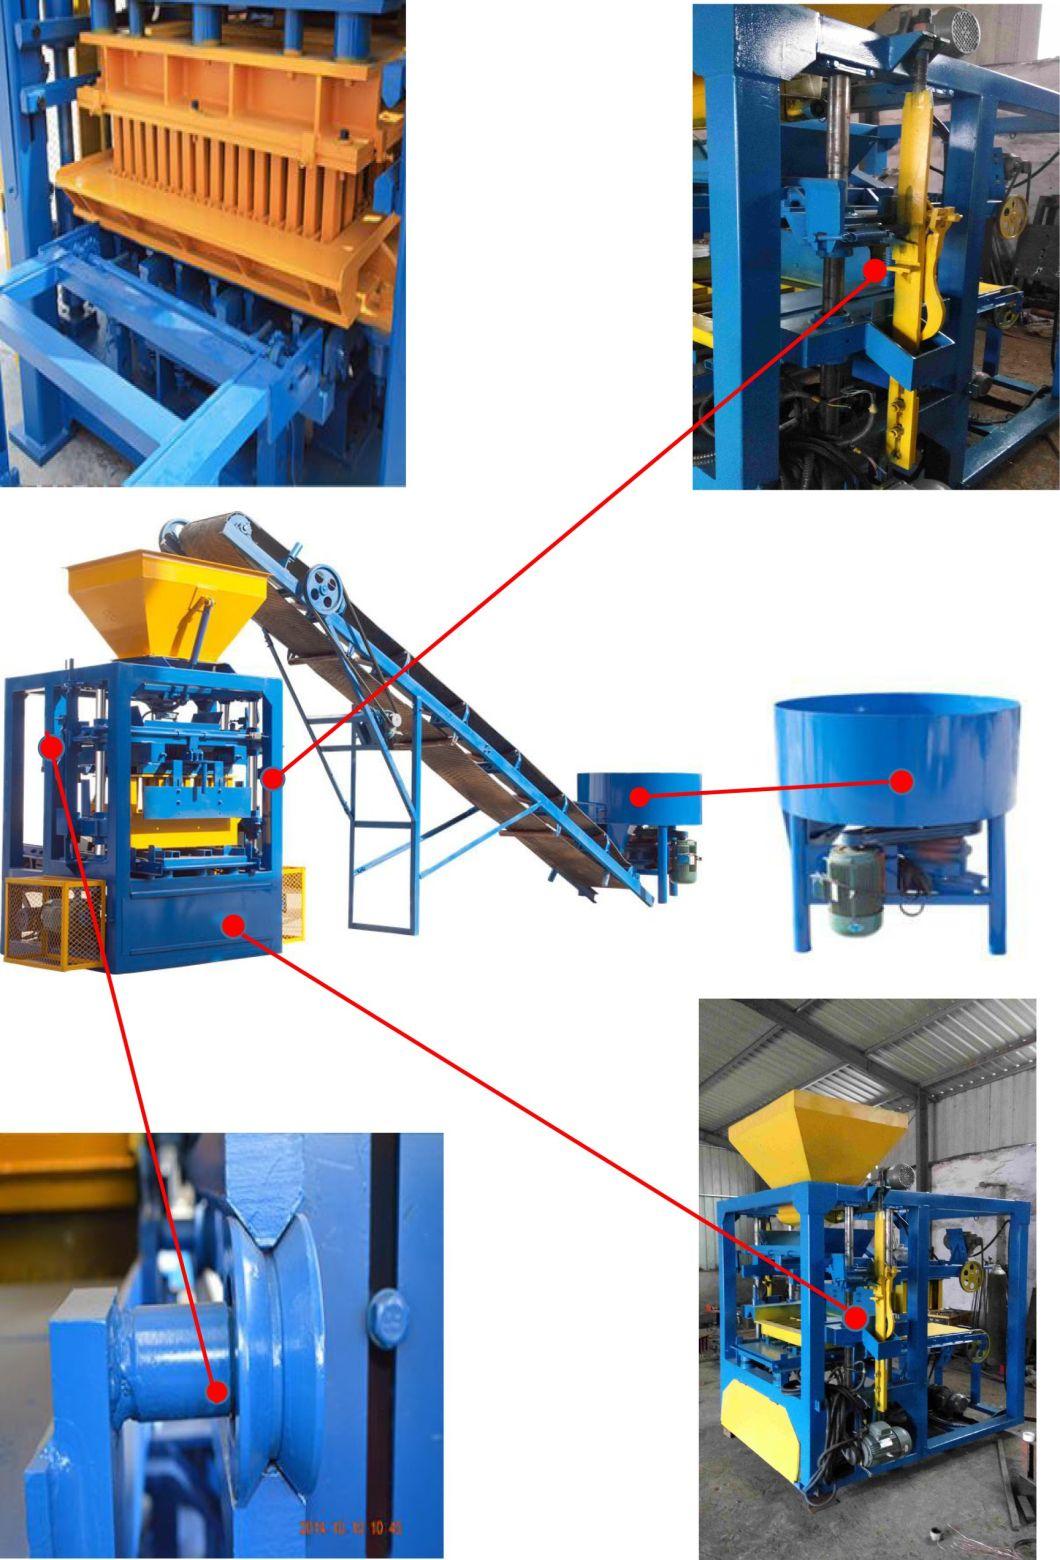 Semi-Automatic Qt 4-24 Hollow/Solid Paving Brick Making Machine for Sale in Malaysia Price